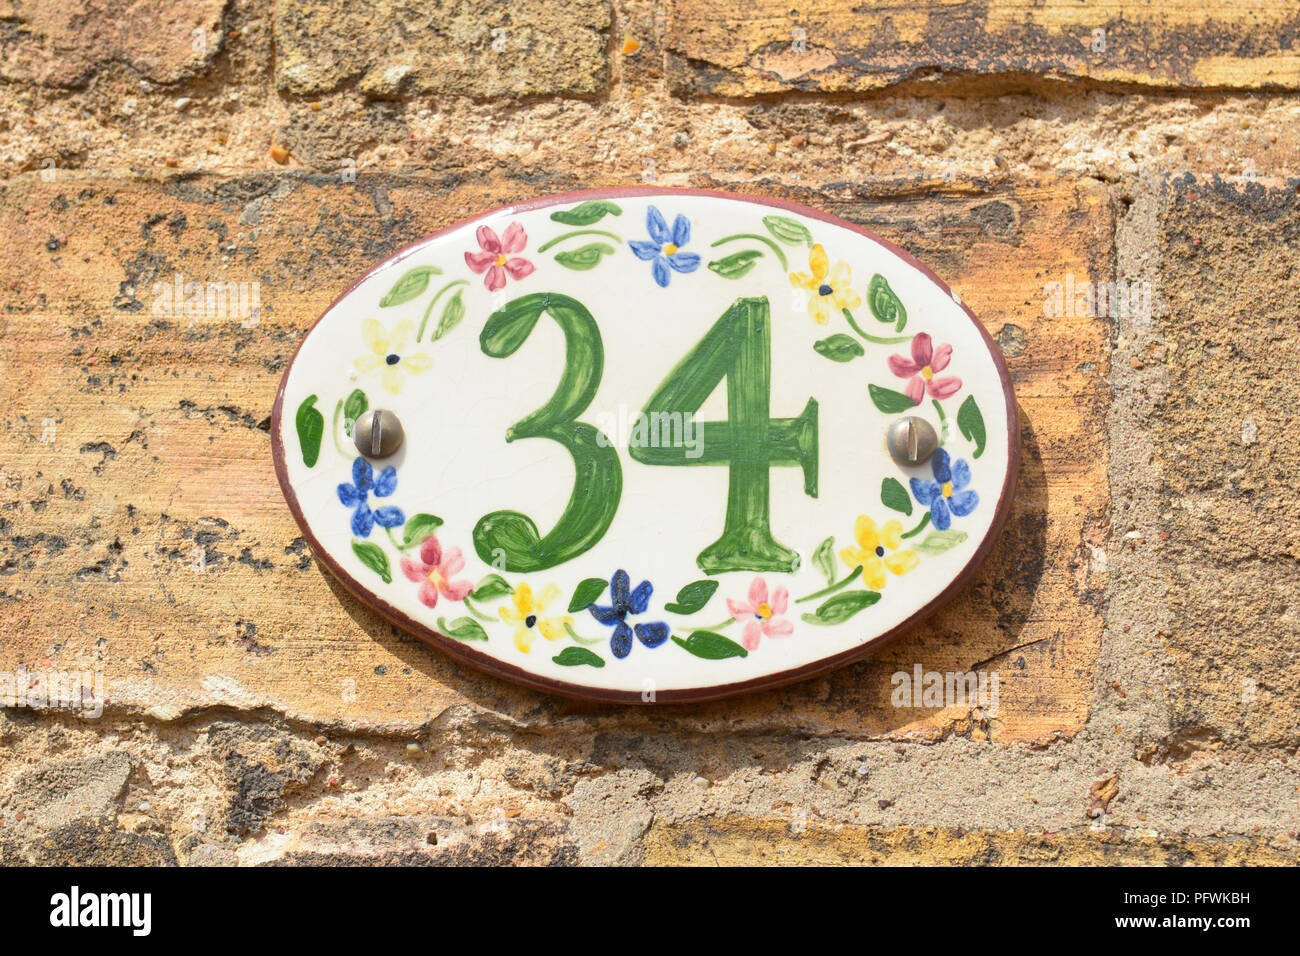 House number 34 sign on ceramic tile with painted flowers Stock Photo